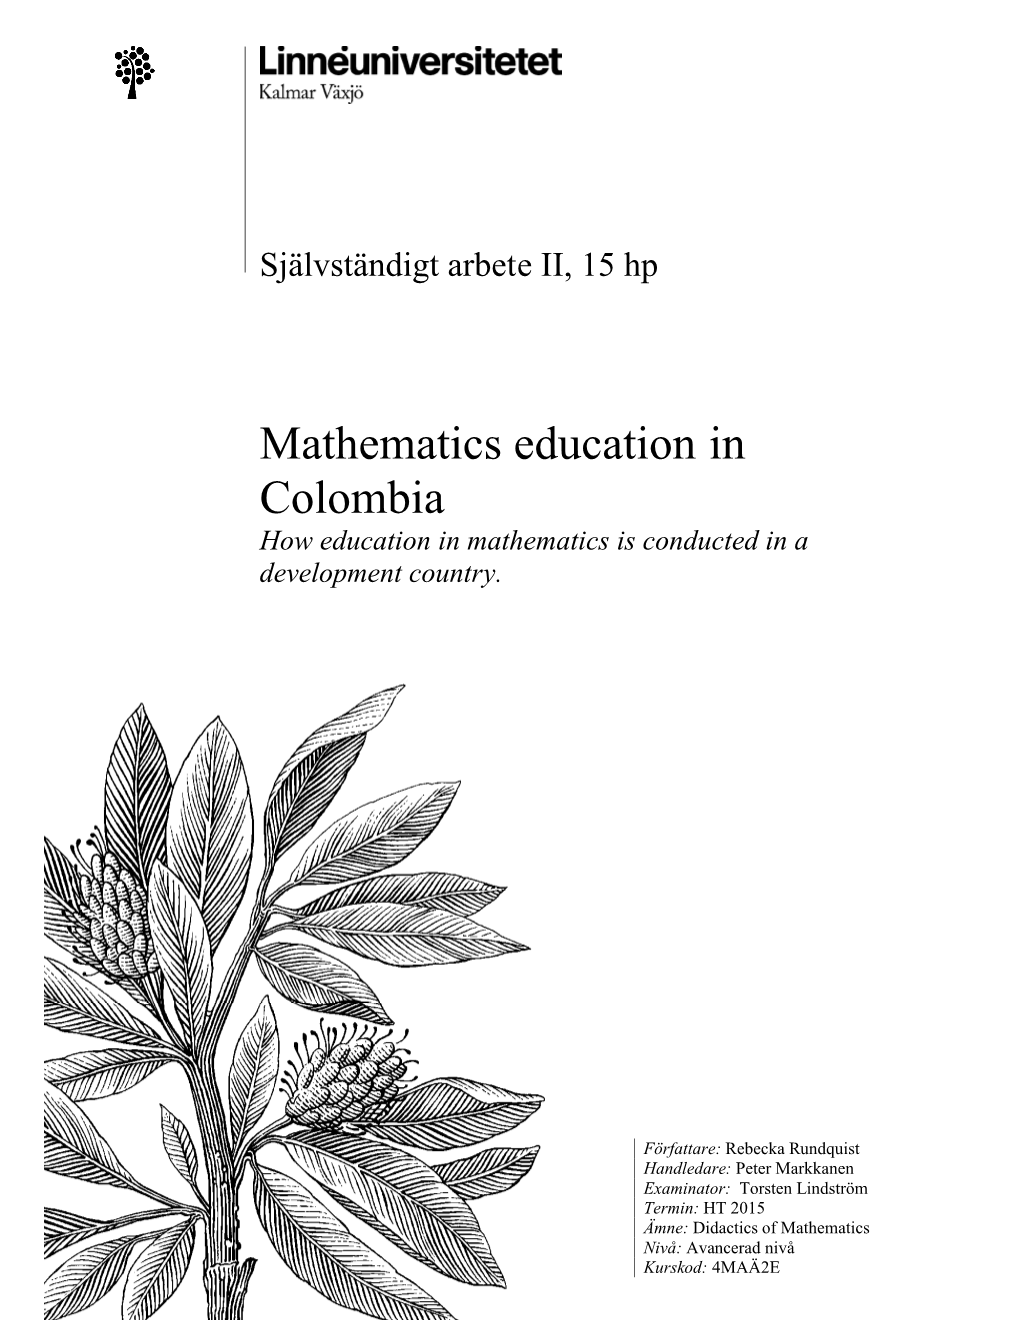 Mathematics Education in Colombia How Education in Mathematics Is Conducted in a Development Country